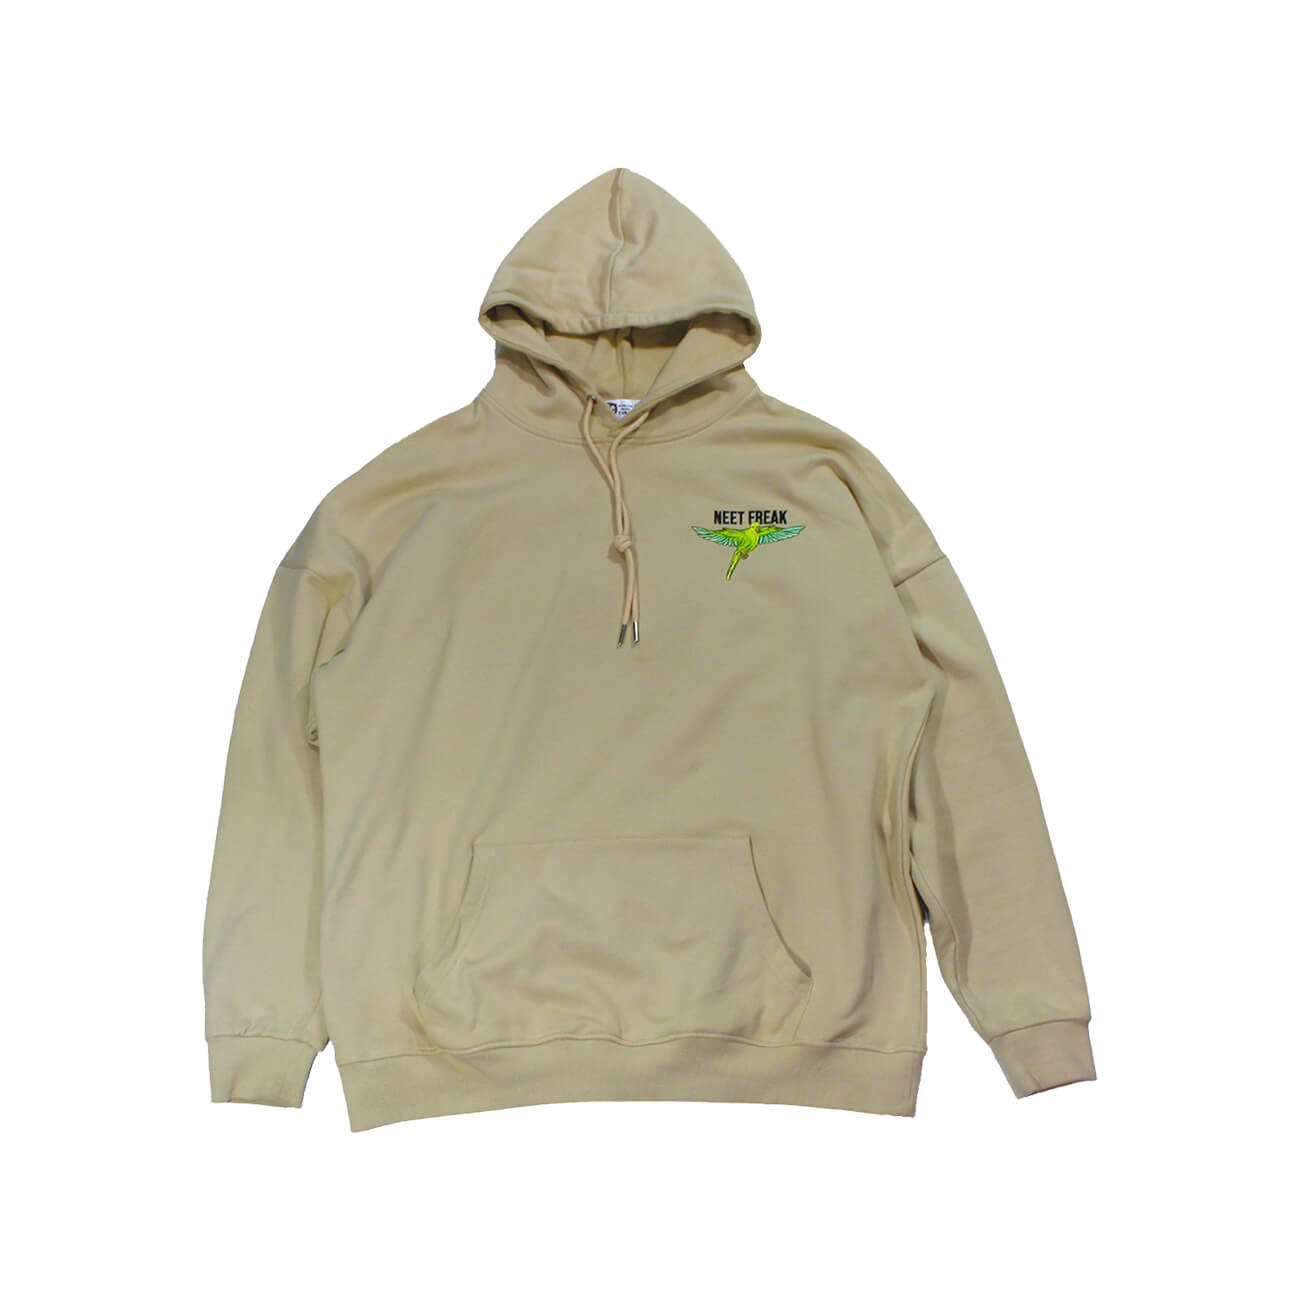 Tan embroidered mens hoody